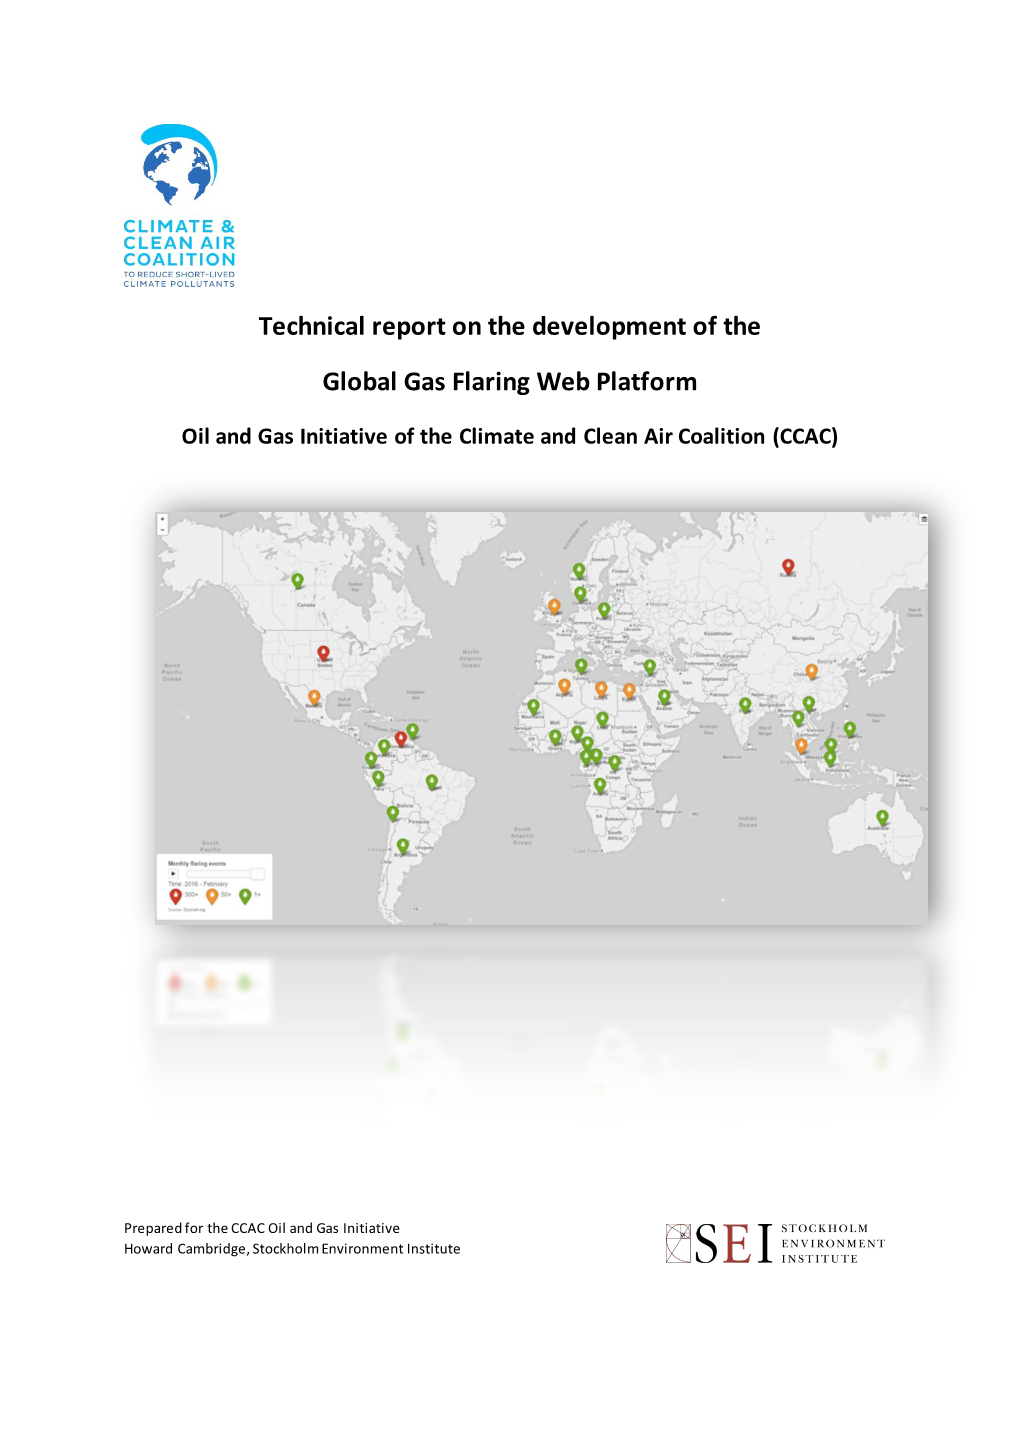 Technical Report on the Development of the Global Gas Flaring Web Platform